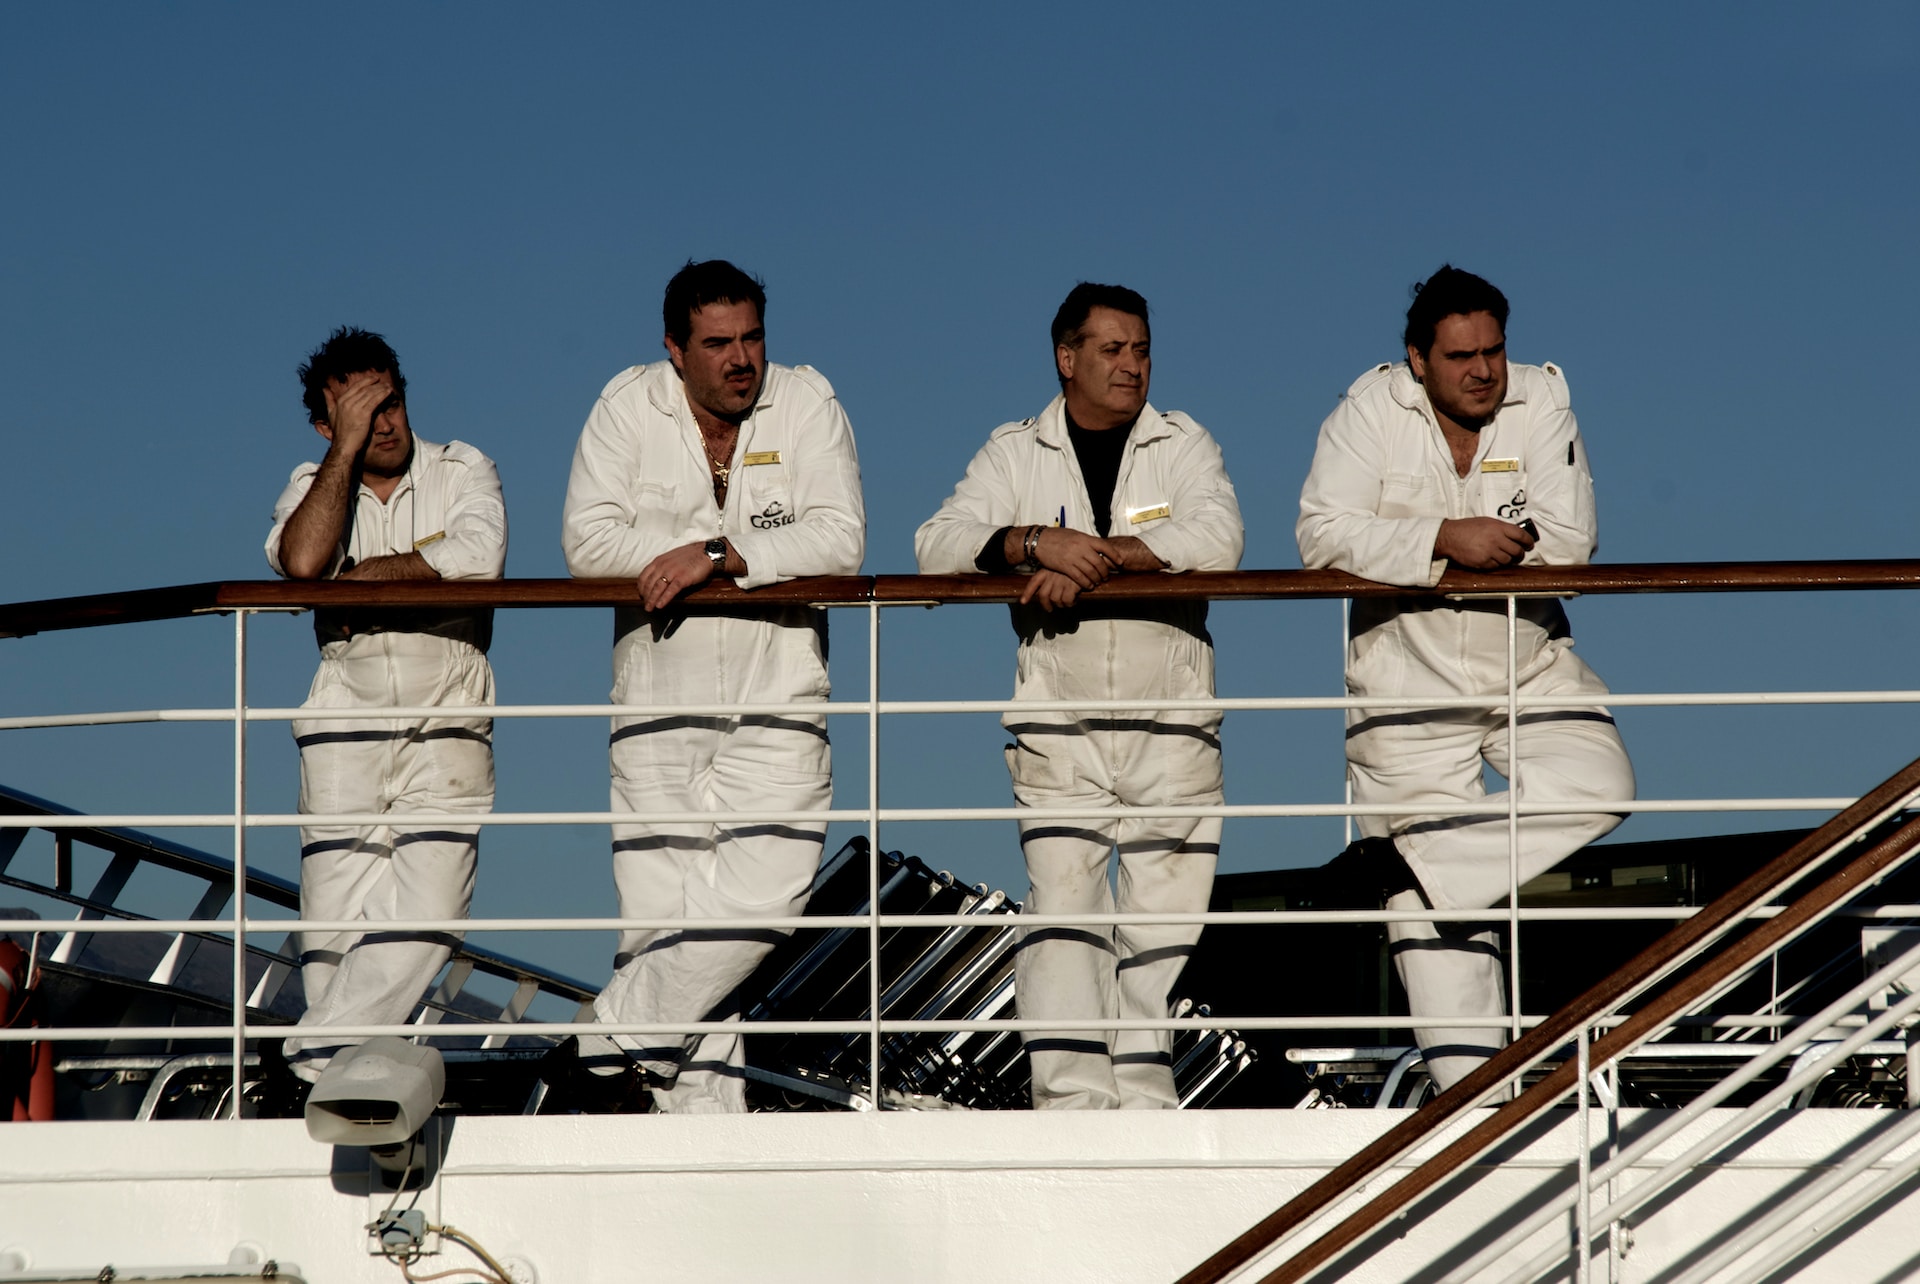 Four seafarers leaning on the rail of a deck